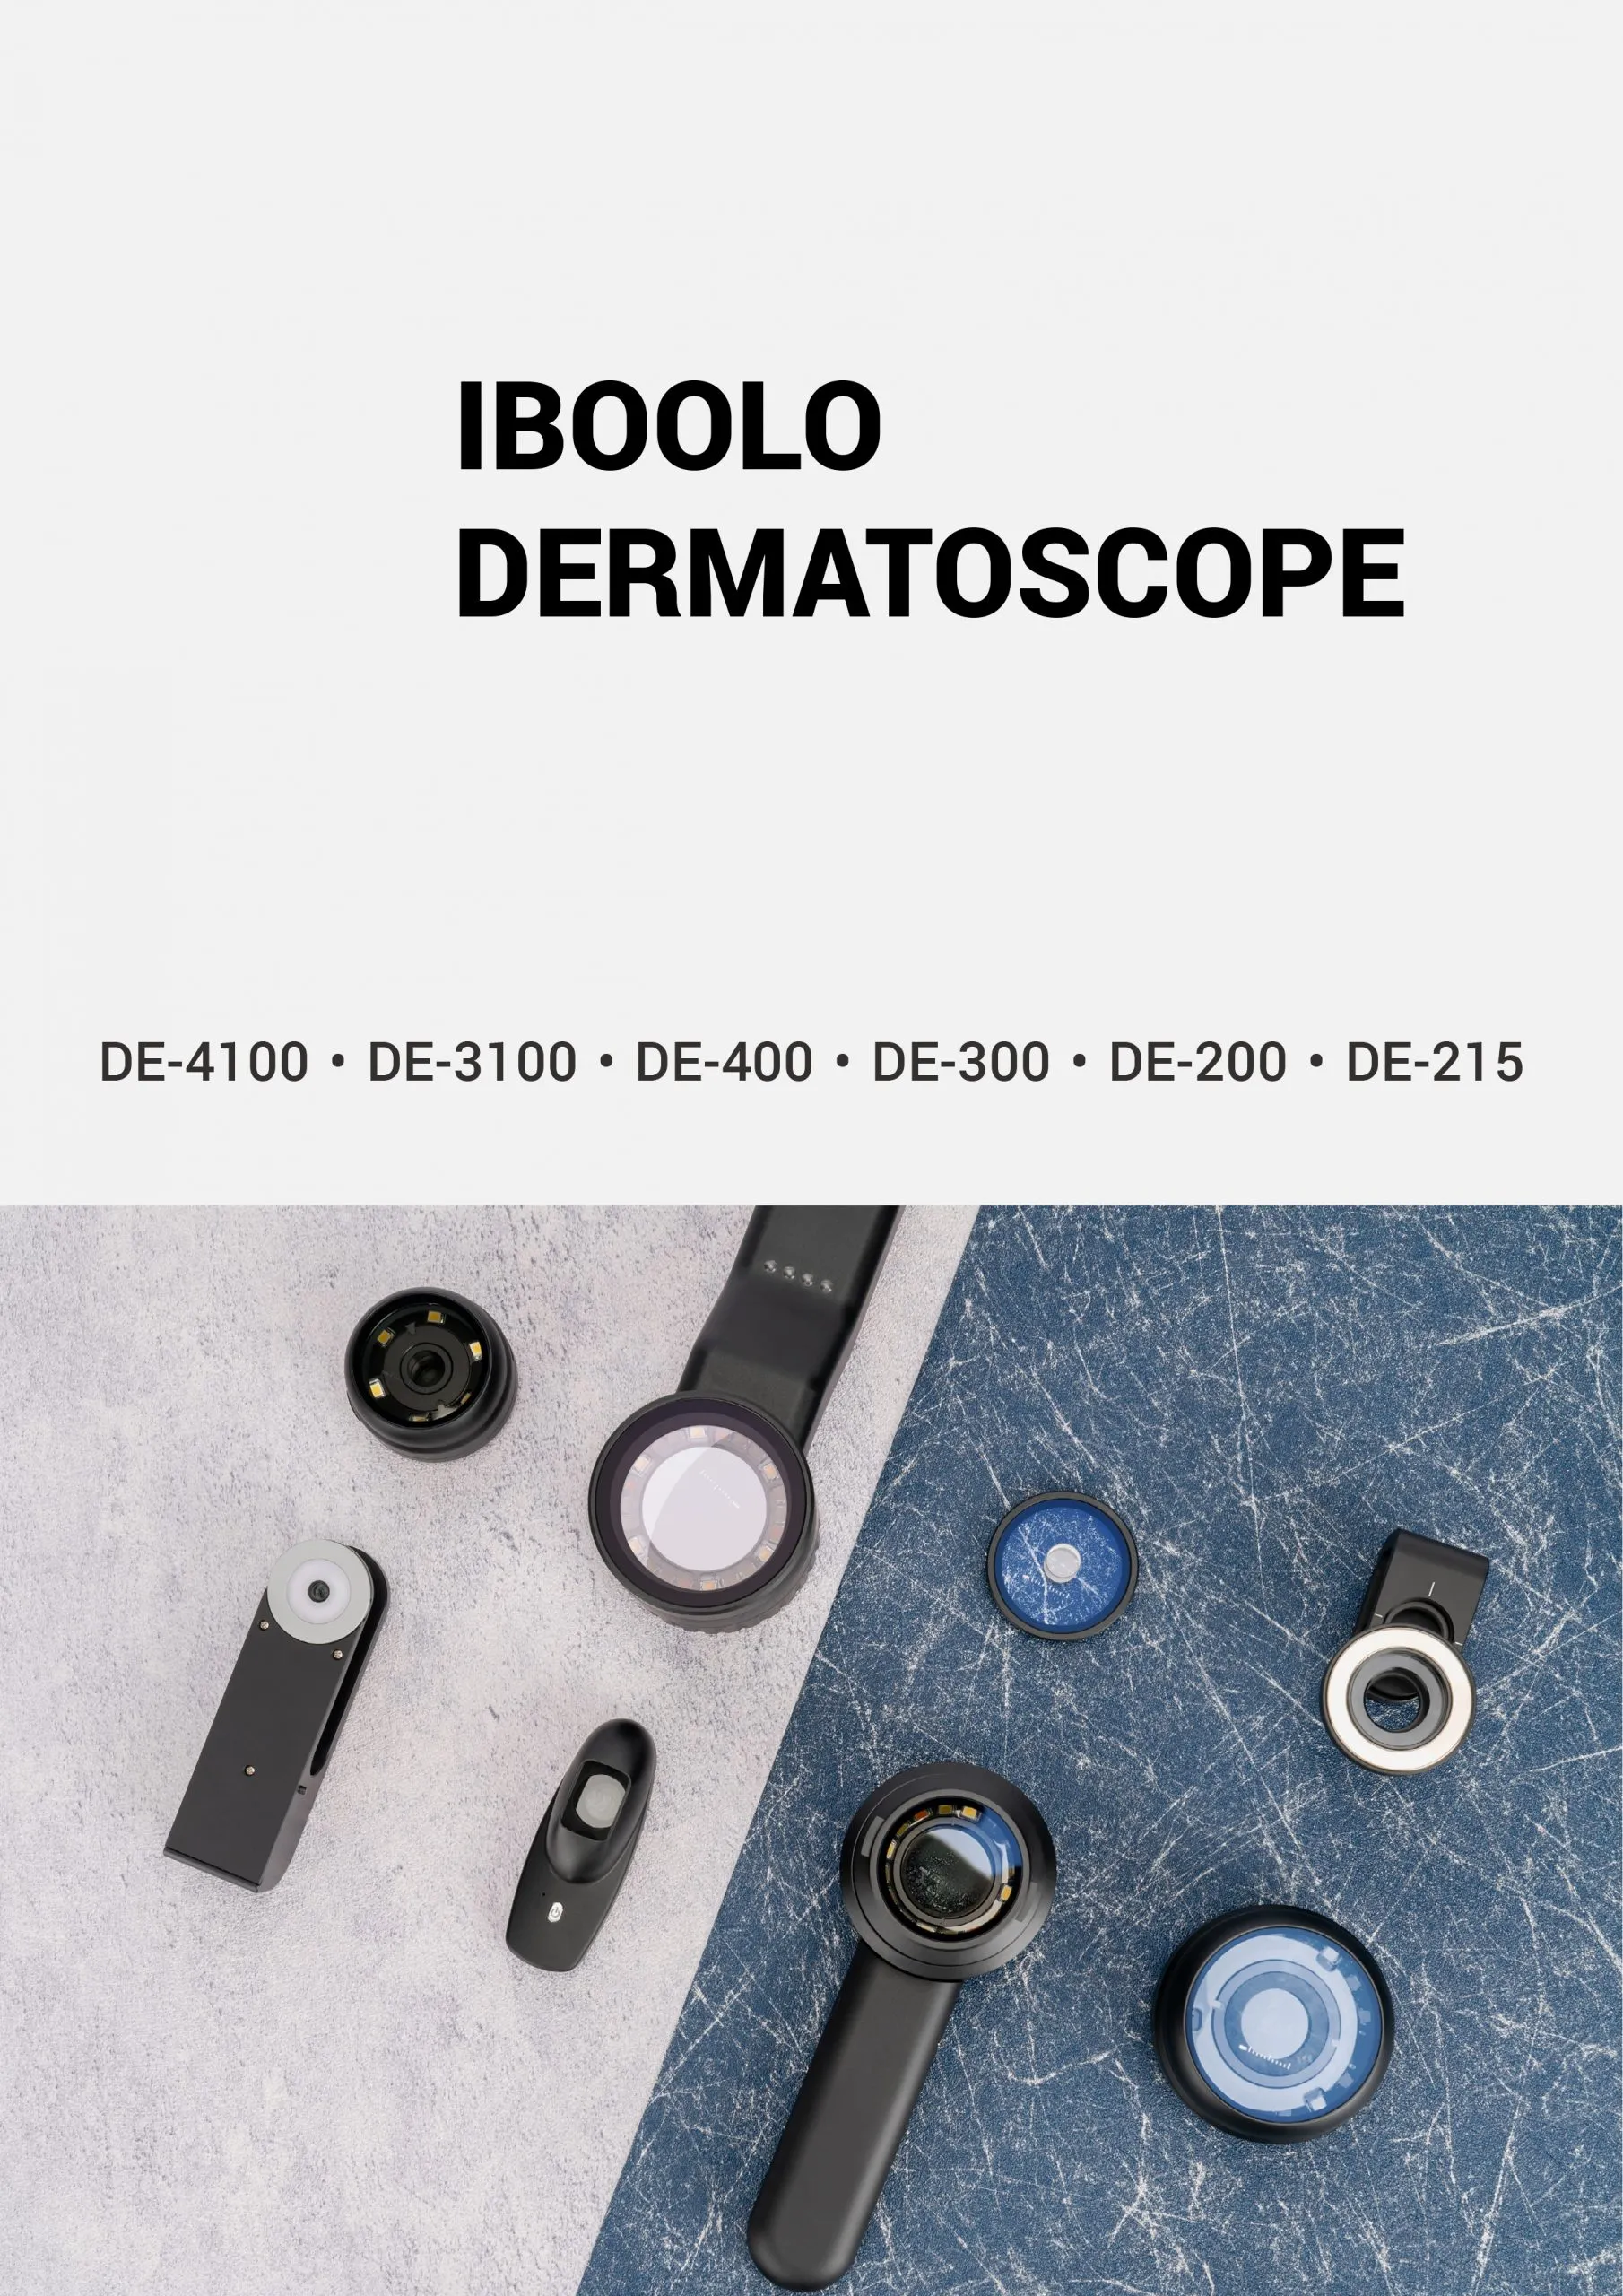 mobile phone dermatoscope suppliers & manufacturers